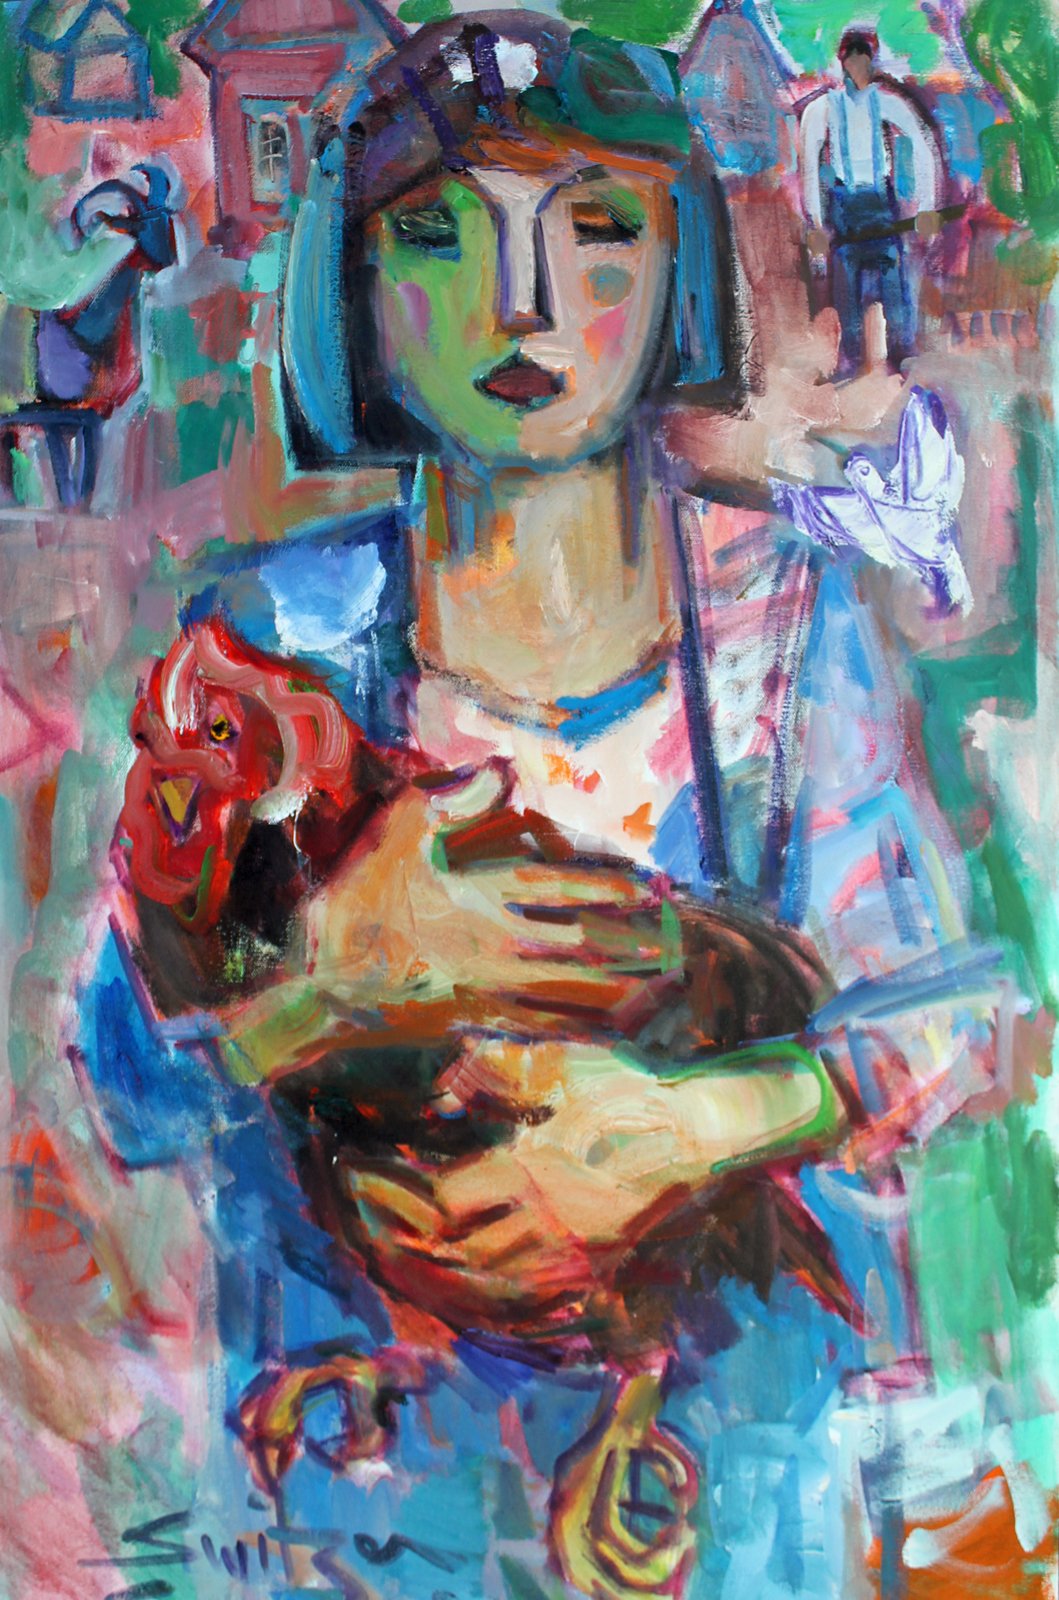  “Girl, Chicken, Goat,”                                                                  36x24 inches,                                                                                  oil on canvas                                                     